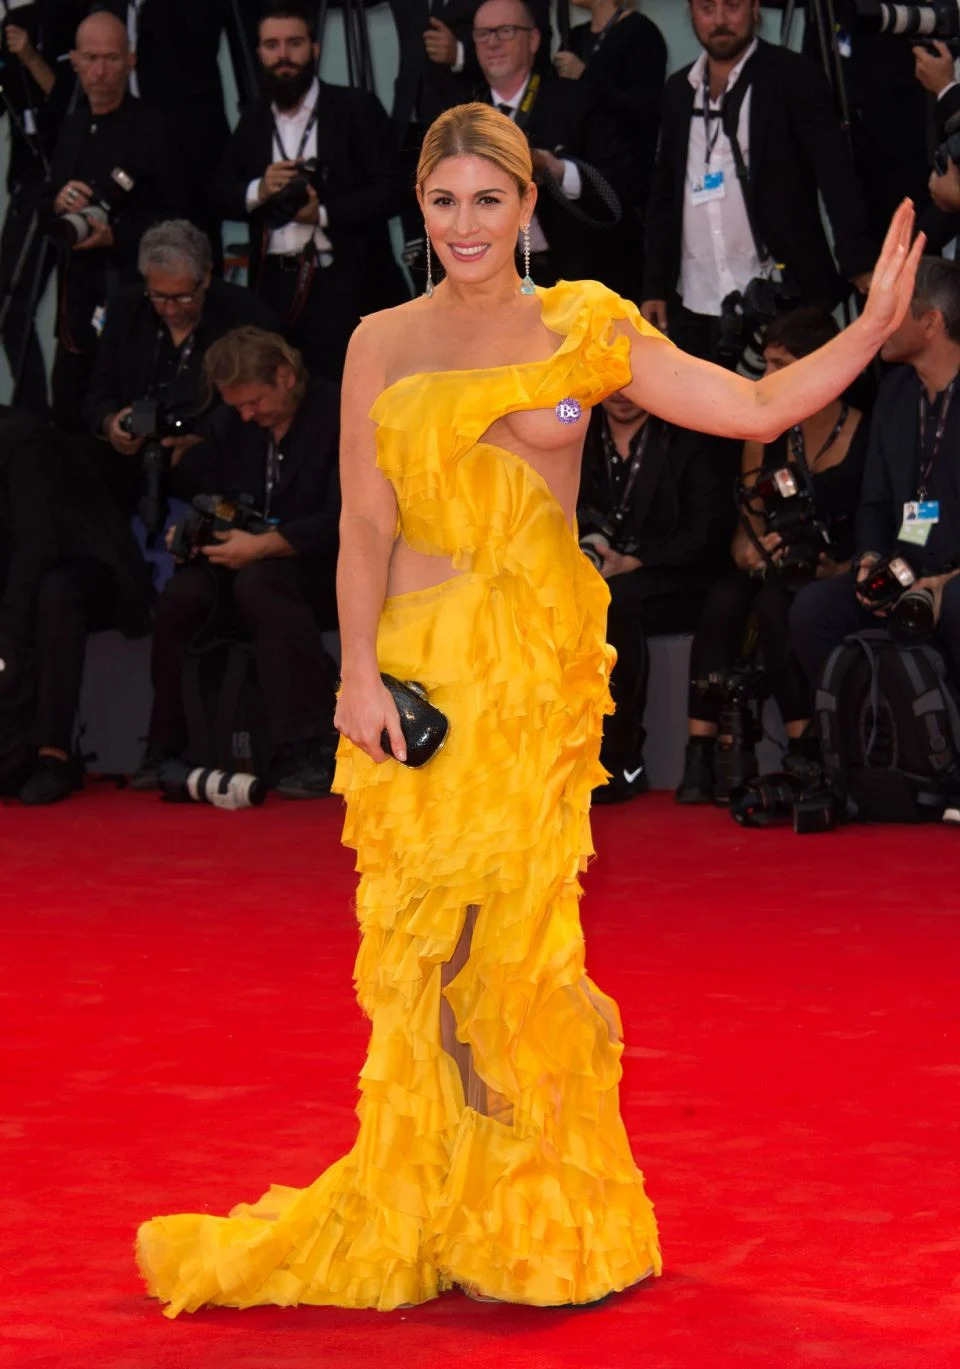 The socialite suffered an awkward wardrobe malfunction on the red carpet at the Venice Film Festival. Source: Mega